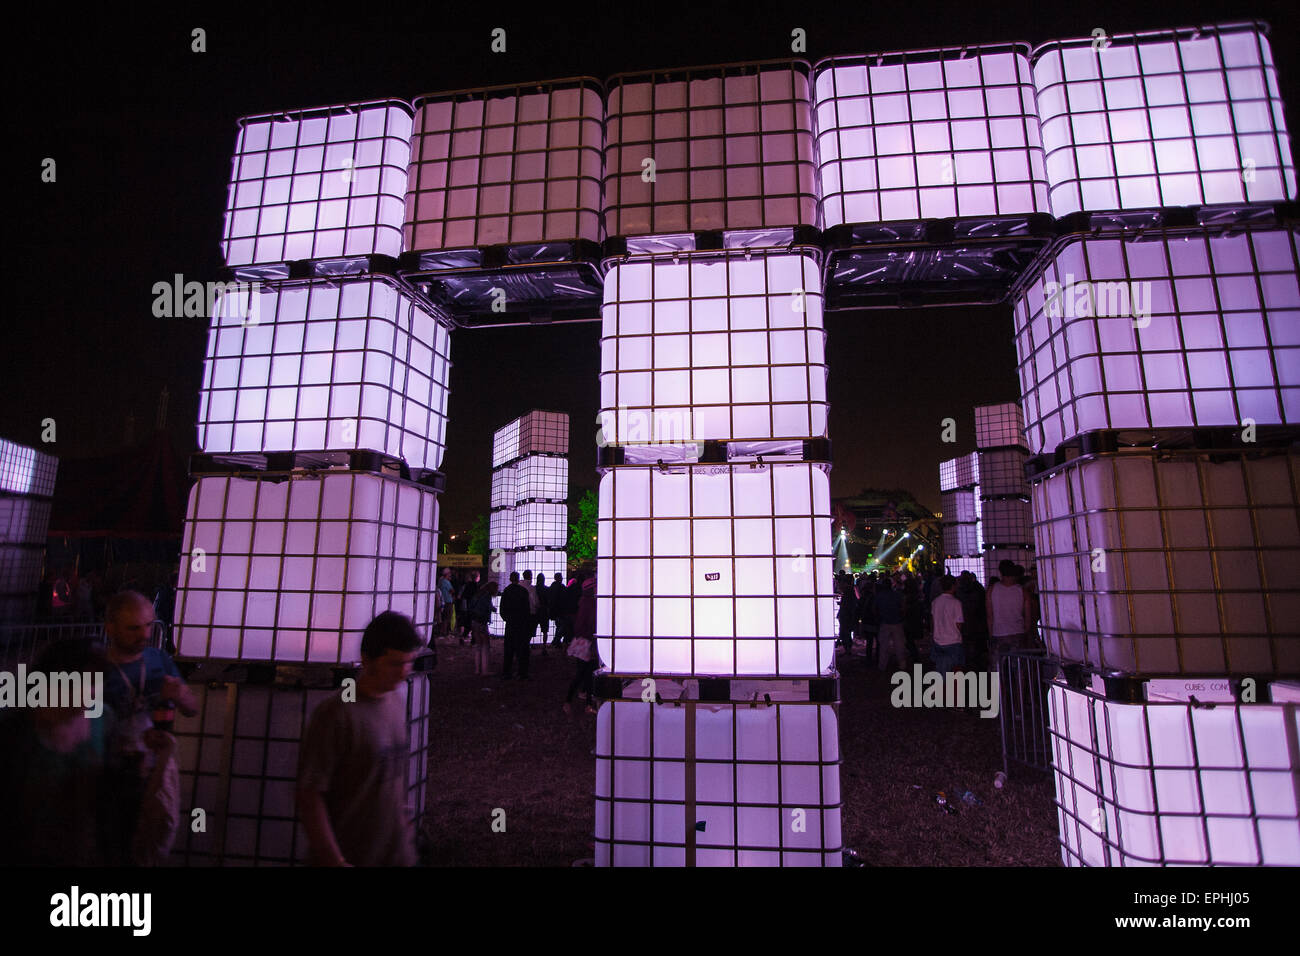 Replica of Stonehenge made of cubes of light at this performance space at the Dance Tent zone at Glastonbury Festival/ 'Glasto' Stock Photo